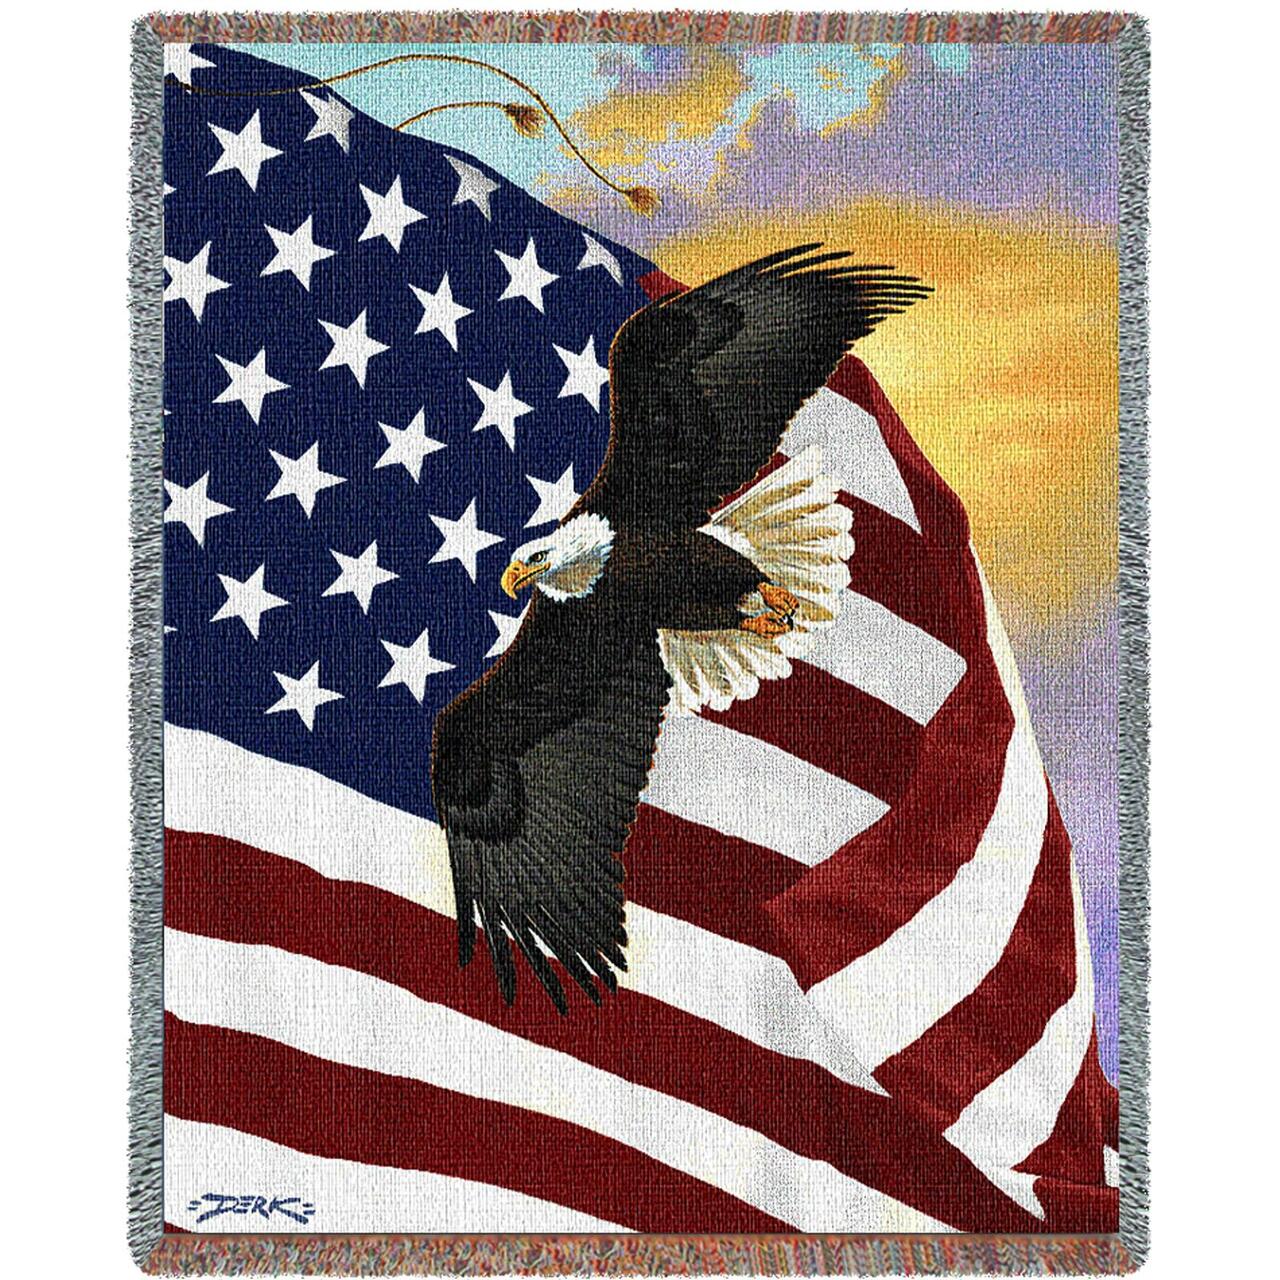 United States American Flag With Eagle - Majestic - Derk Hanson - Woven Tapestry Throw Blanket with Fringe Cotton USA 72x54